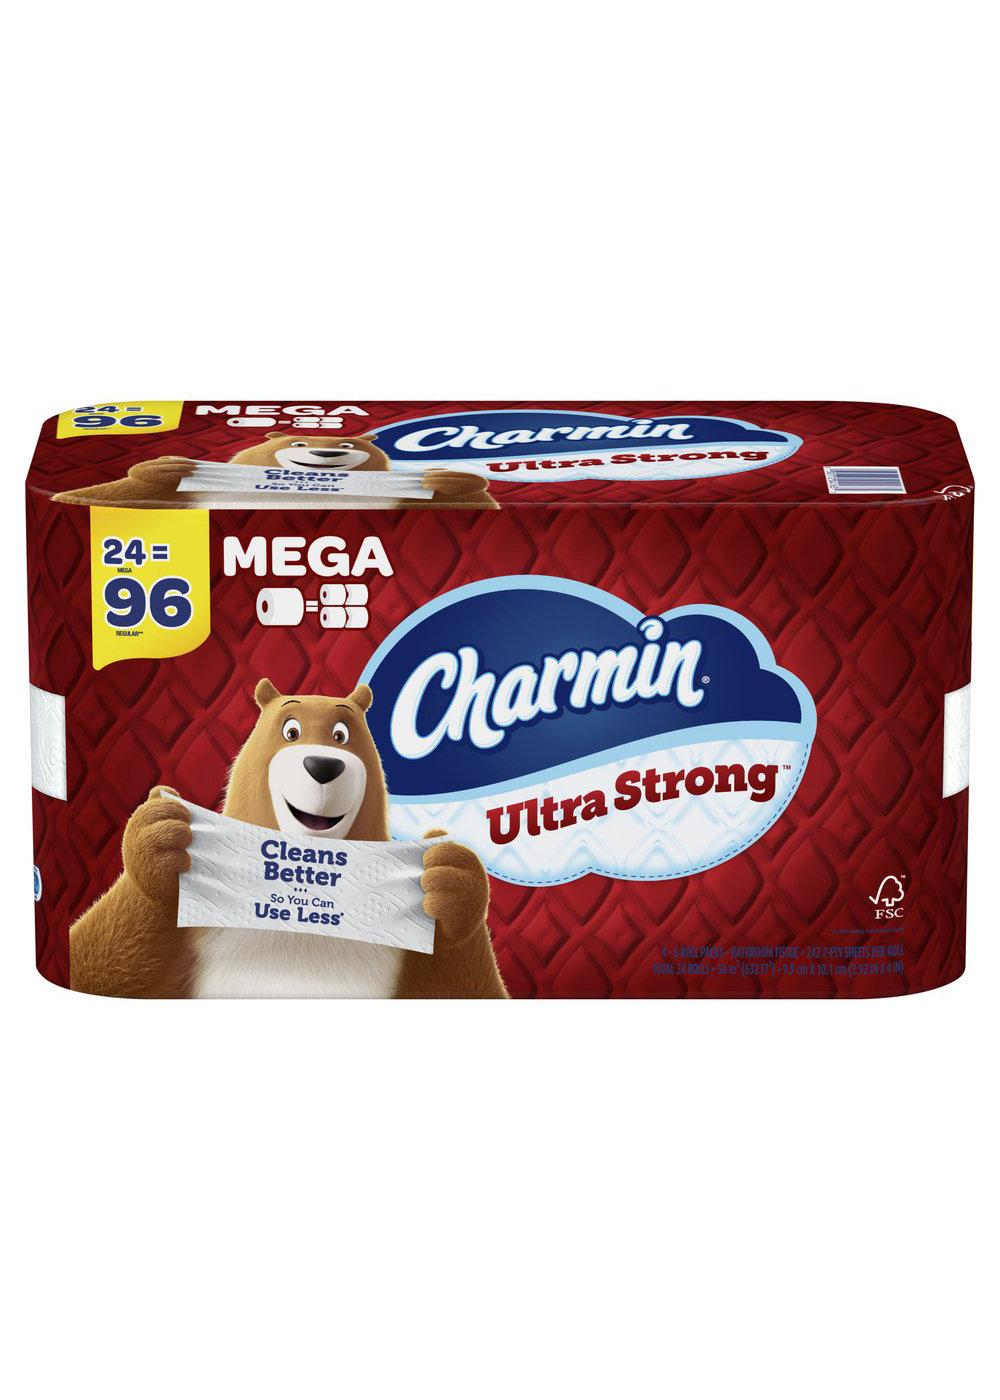 Charmin Ultra Strong Toilet Paper; image 1 of 2